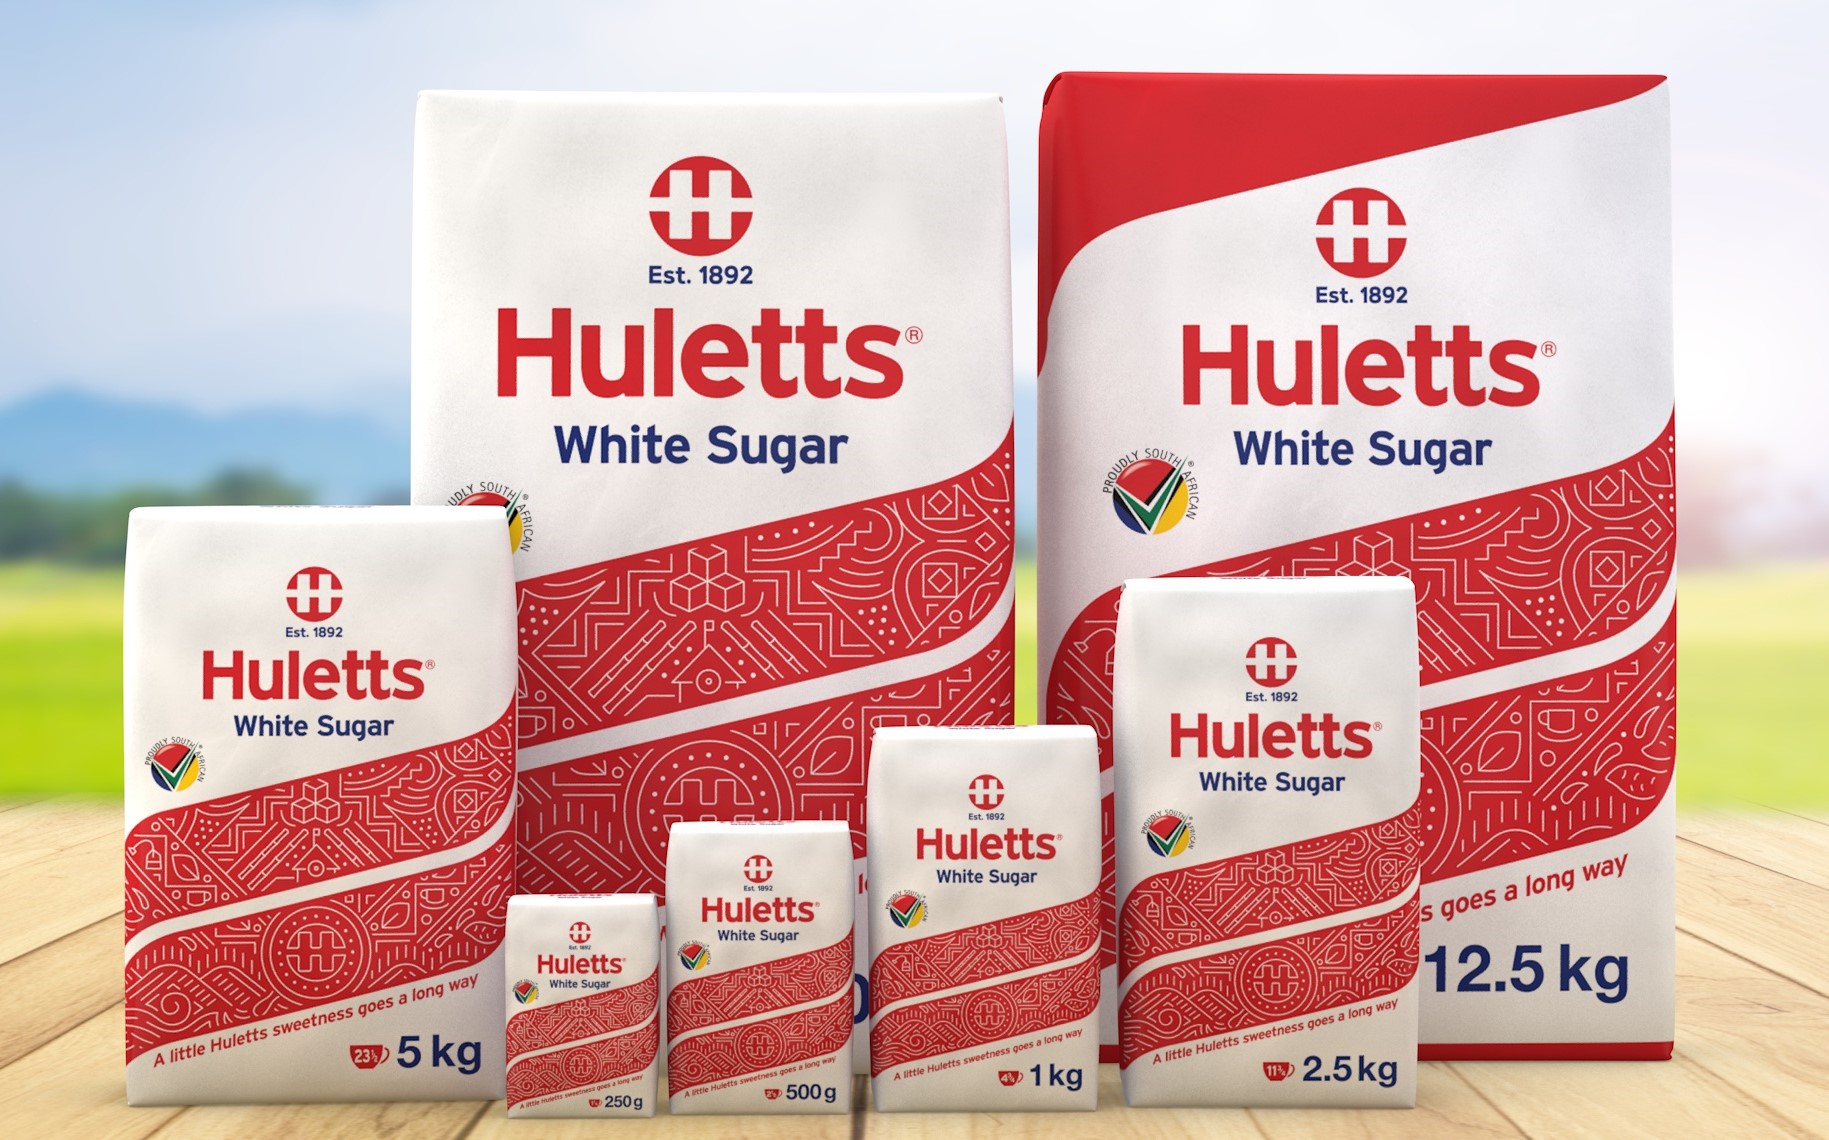 Huletts white sugar packaging design by berge farrell design. Group photo with 12kg packs all the way to 100g packs.